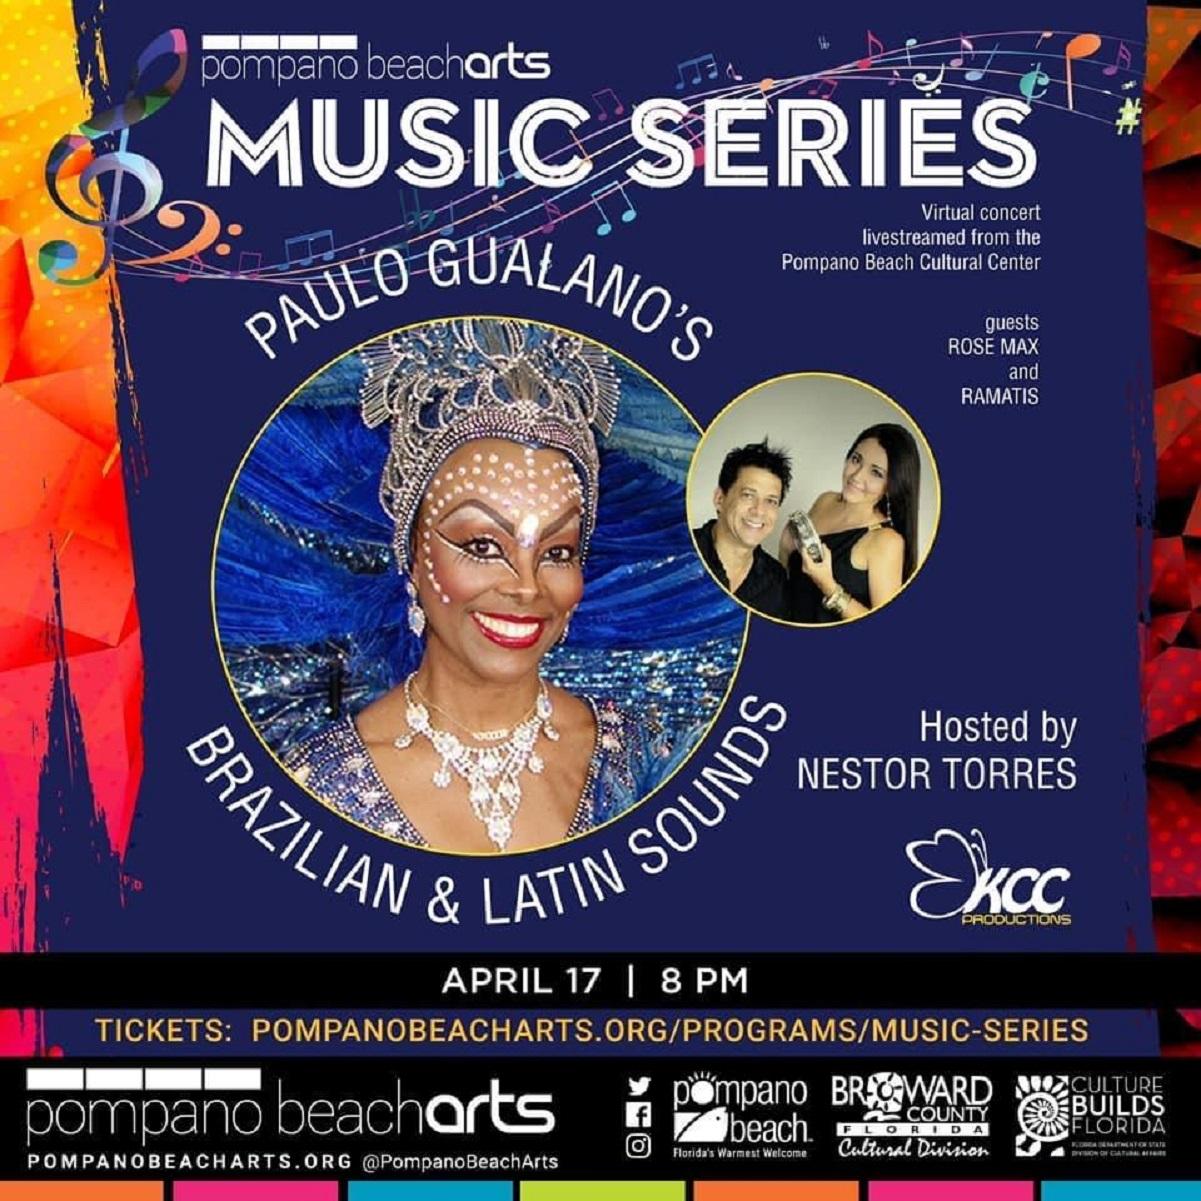 Paulo Gualano’s Brazilian & Latin Sounds with the Rose Max and Ramatis Brazilian Party